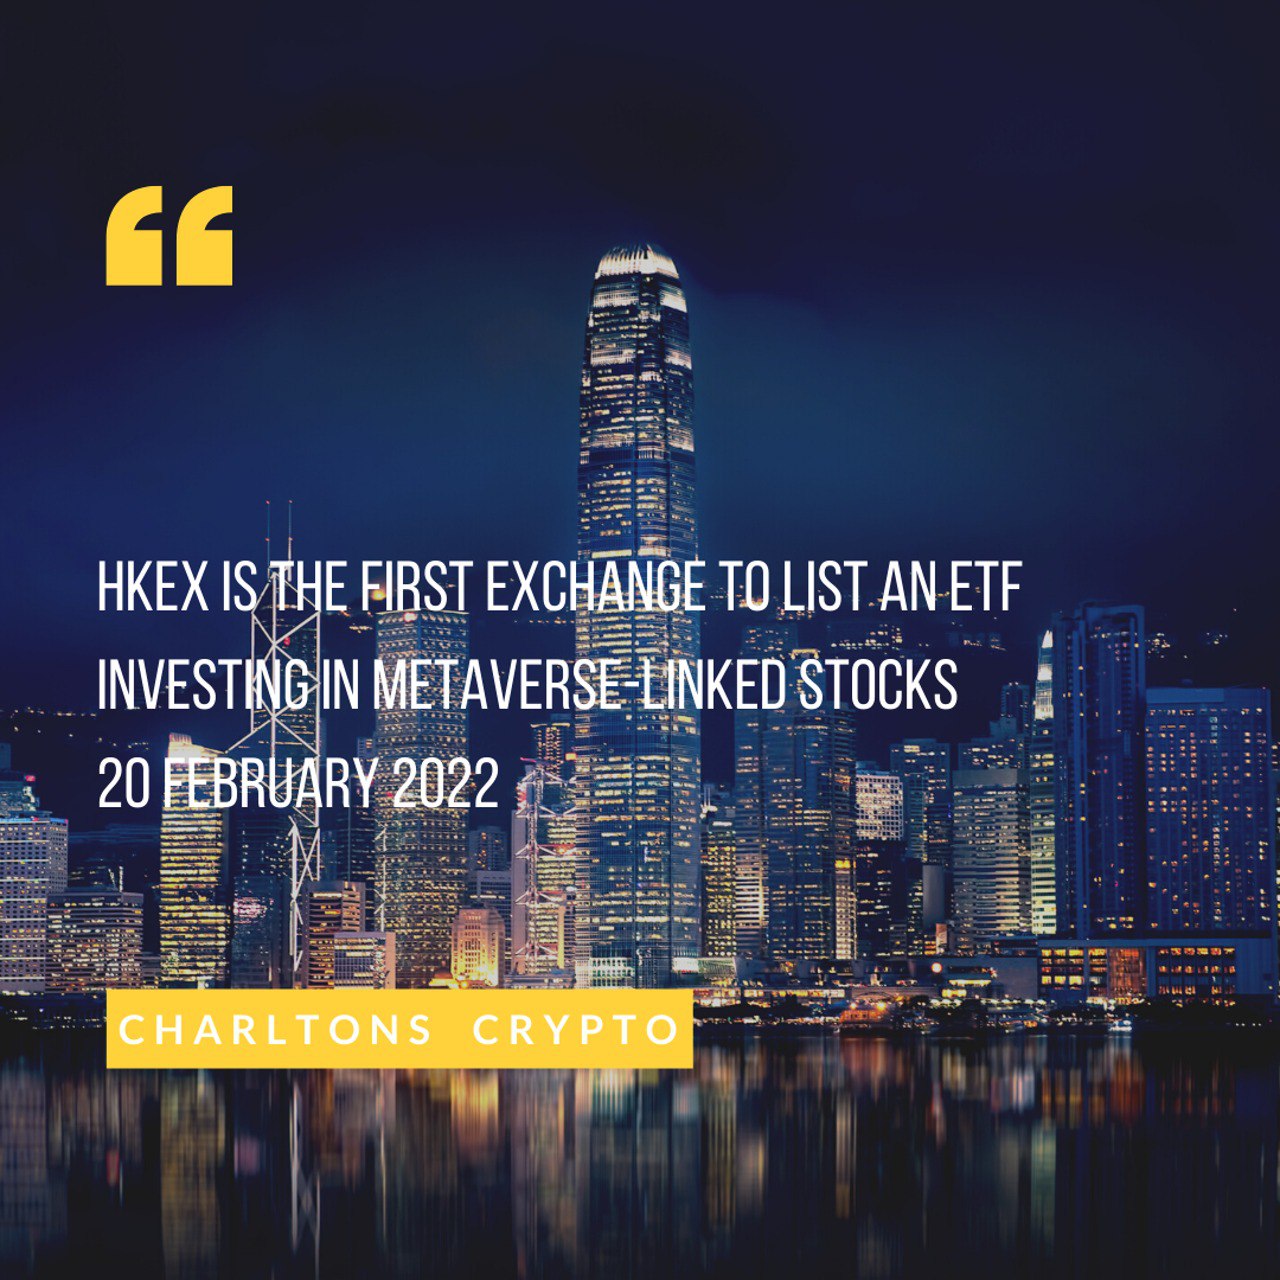 HKEX is the first exchange to list an ETF investing in metaverse-linked stocks 20 February 2022